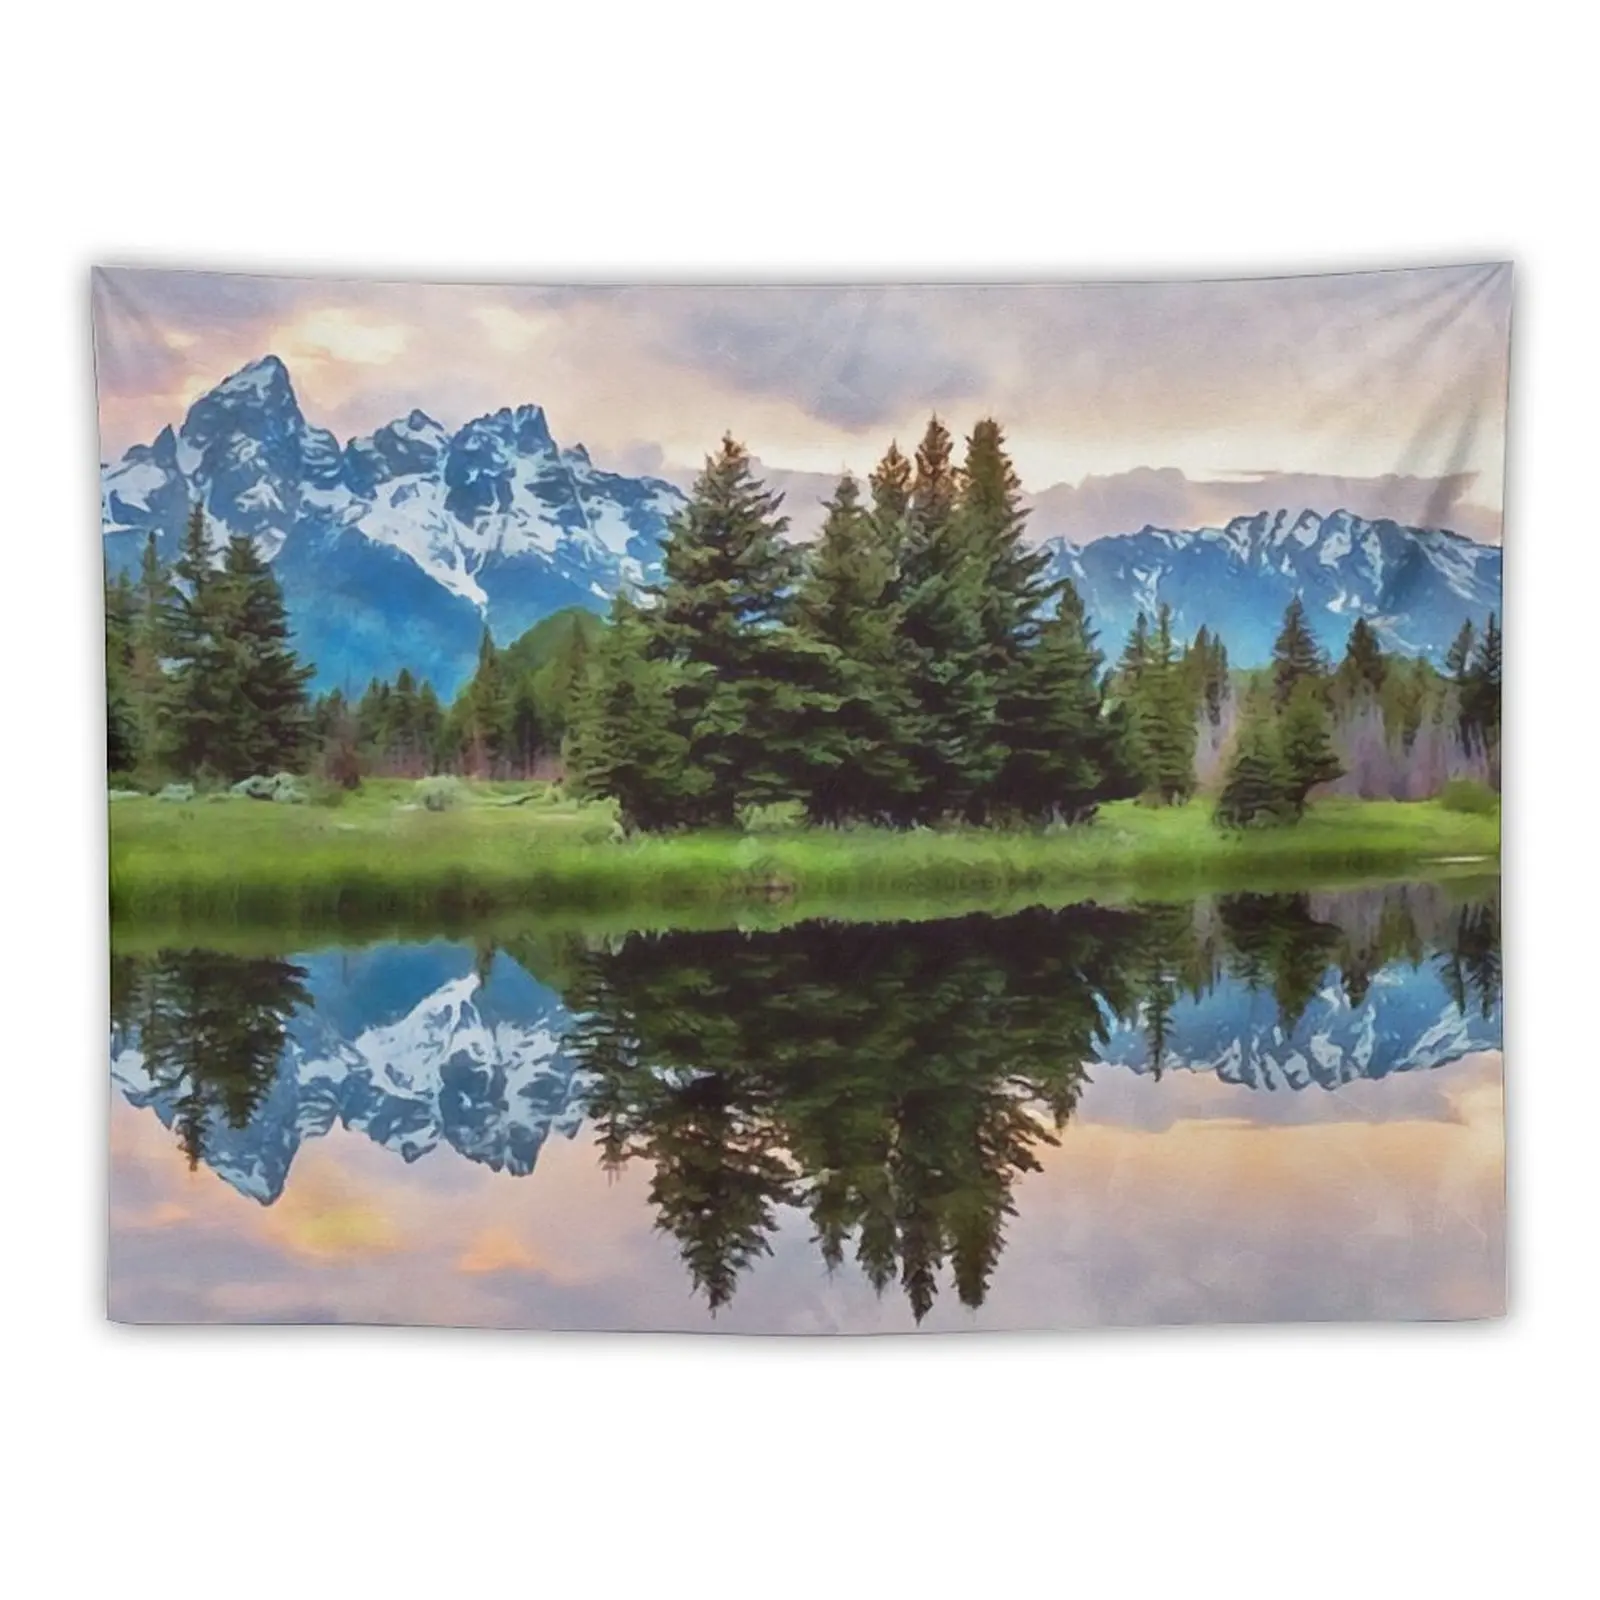 

Wyoming, Grand Teton National Park Tapestry Room Decor Aesthetic Bedroom Decoration For Home Wallpaper Tapestry